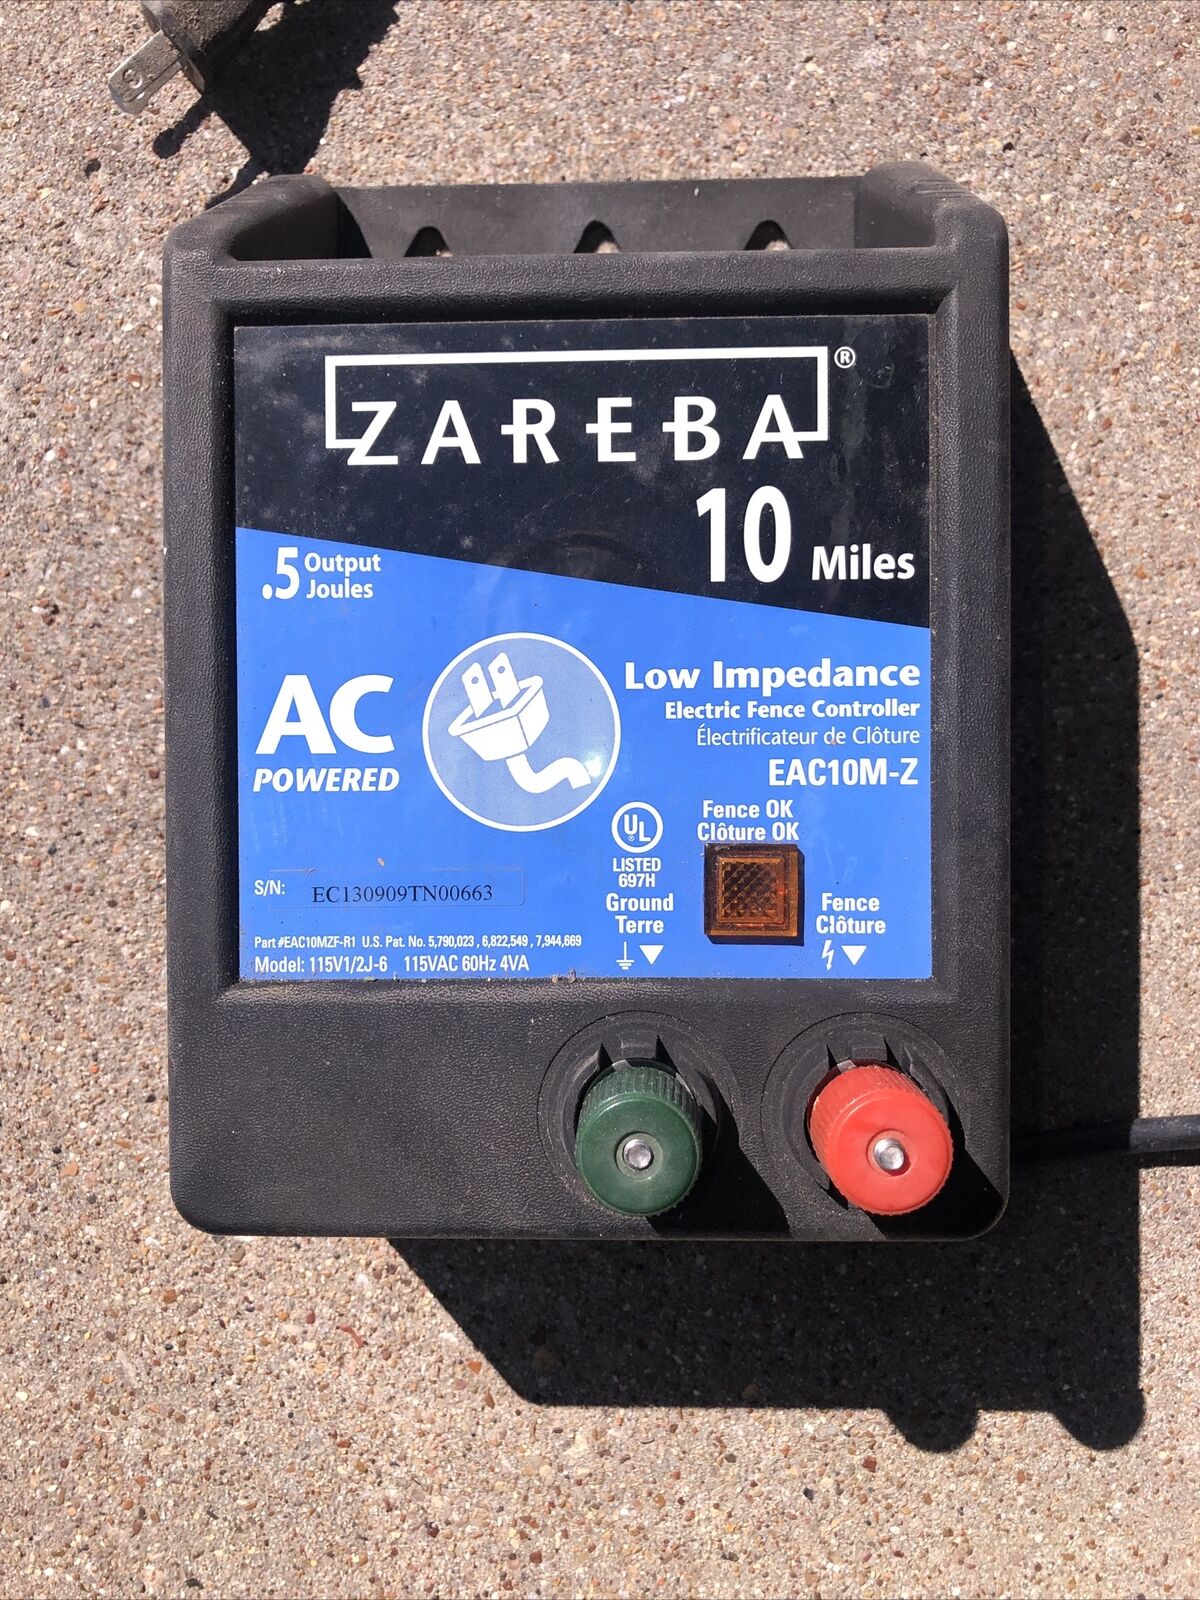 Zareba Energizer Low Impedance 10 Mile Electric Fence Charger AC Power 115 Volt